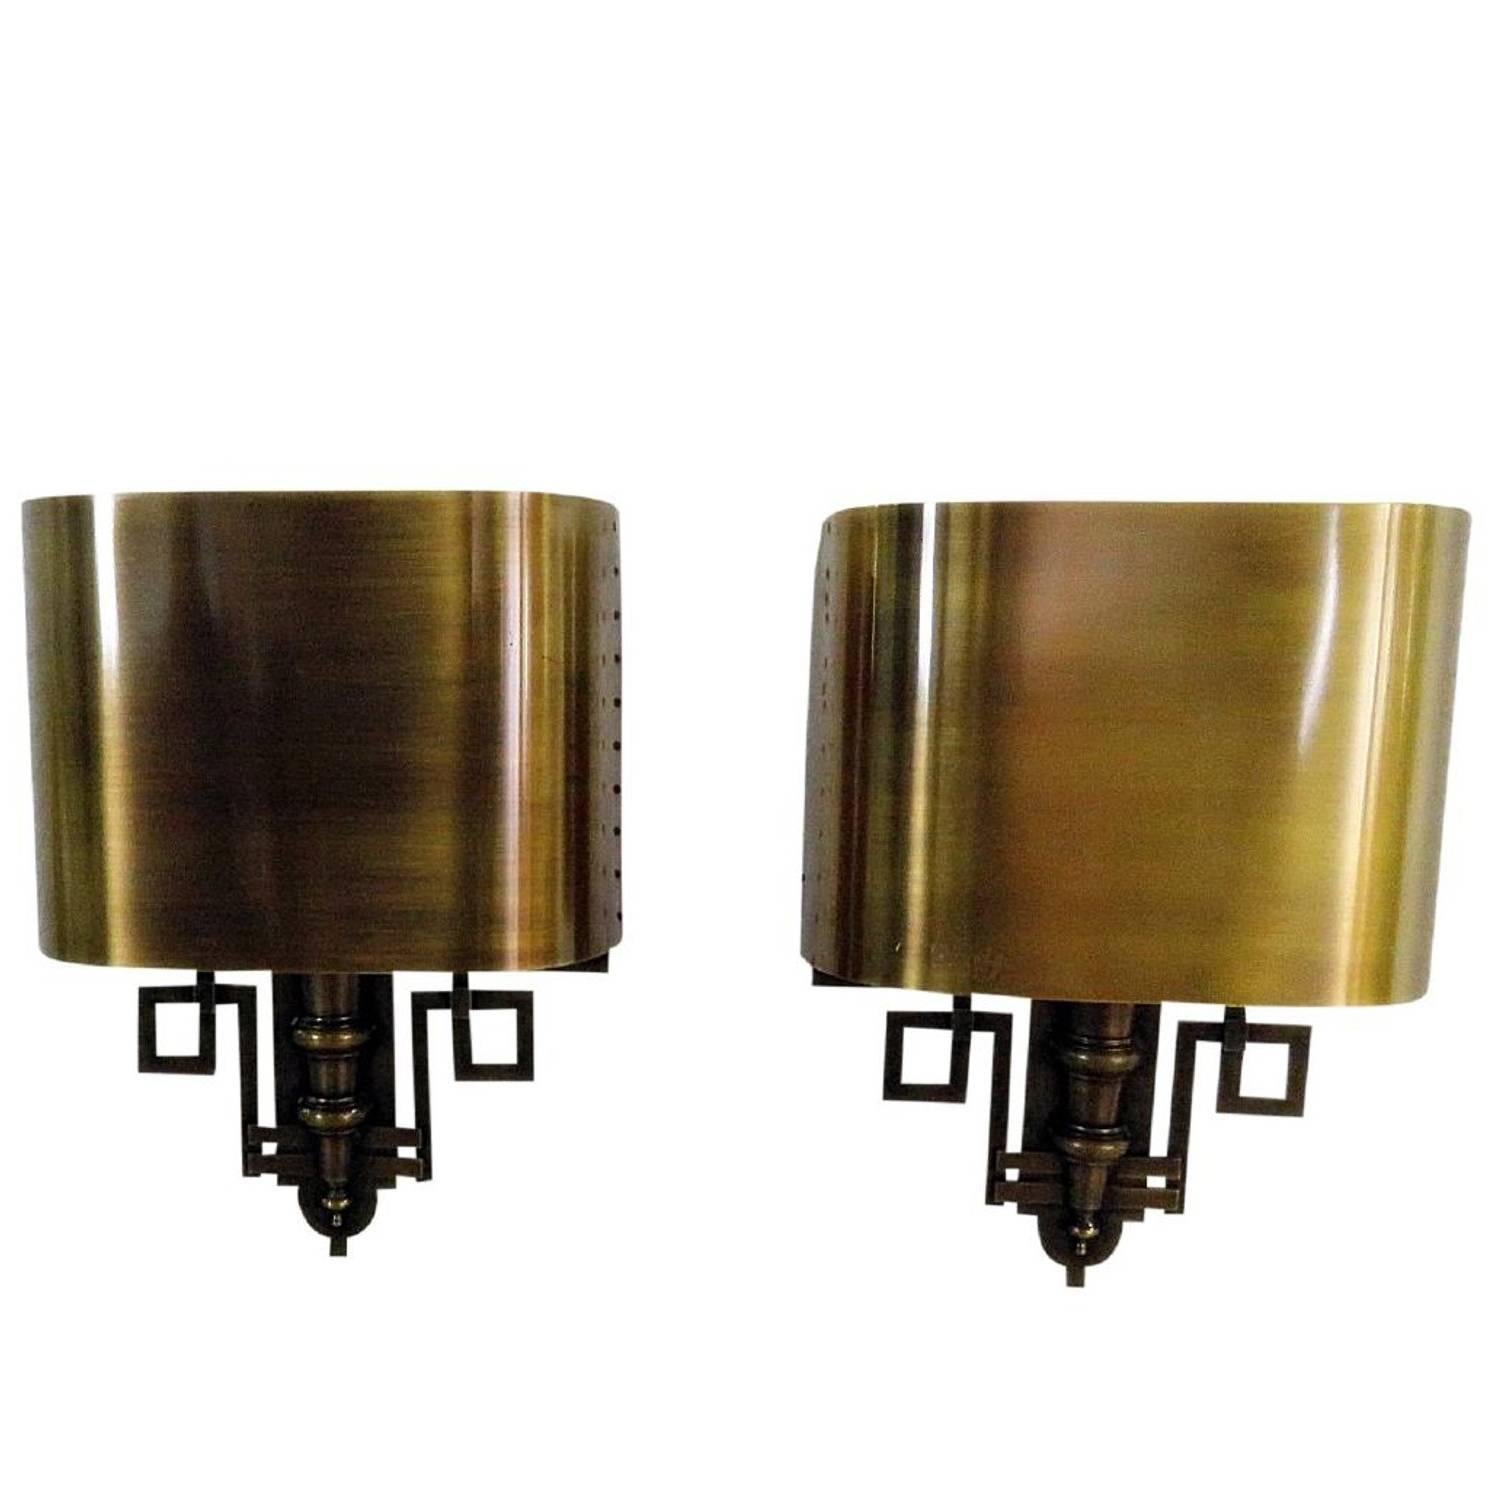 Pair of French Mid-Century Modern Wall Sconces